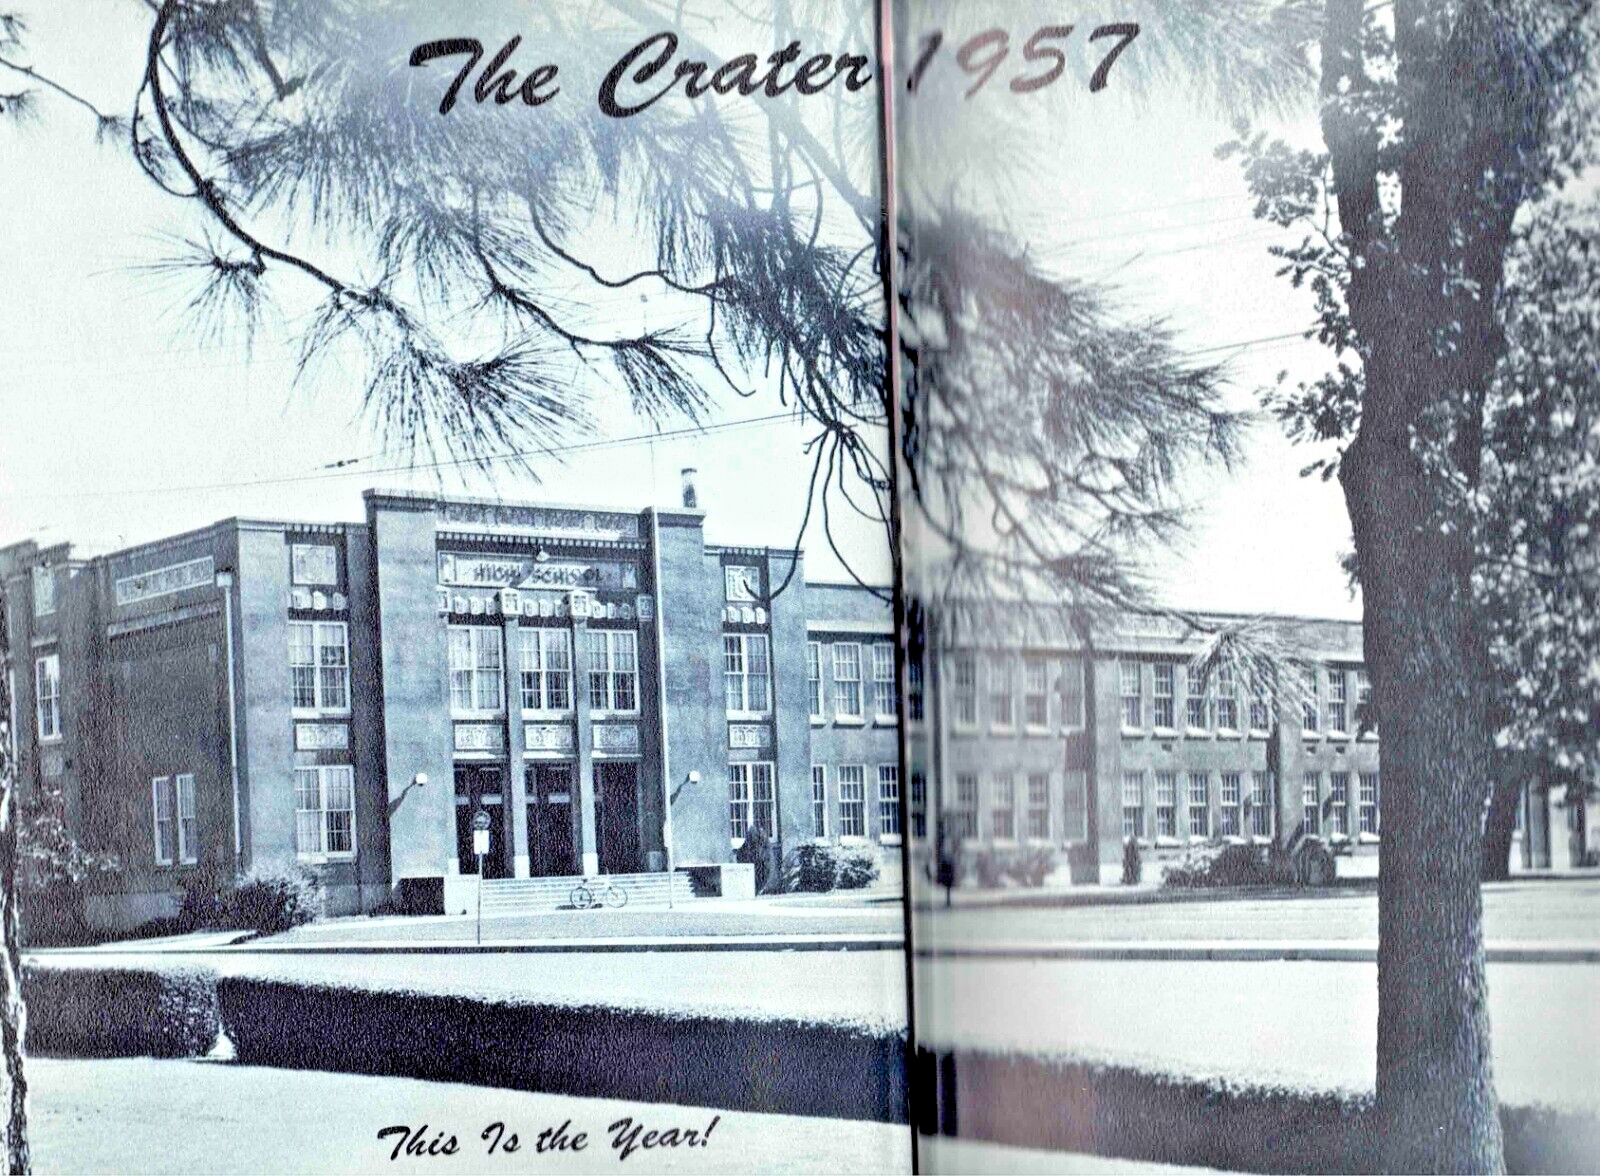 1957 Medford High School Yearbook, Crater, Medford, Oregon, Year of Expression